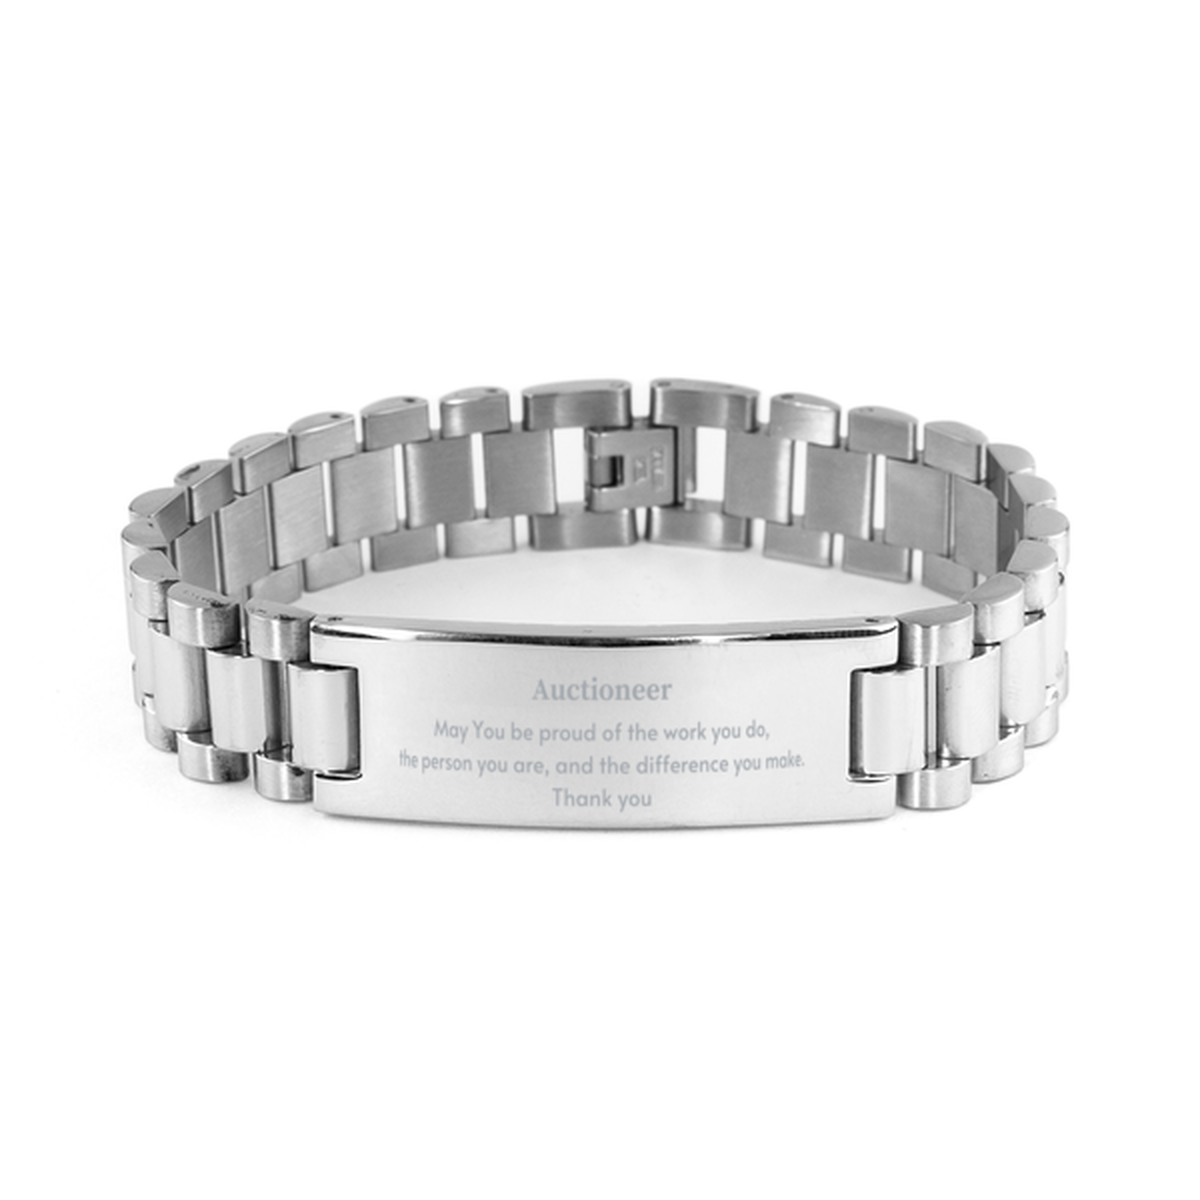 Heartwarming Ladder Stainless Steel Bracelet Retirement Coworkers Gifts for Auctioneer, Auctioneer May You be proud of the work you do, the person you are Gifts for Boss Men Women Friends